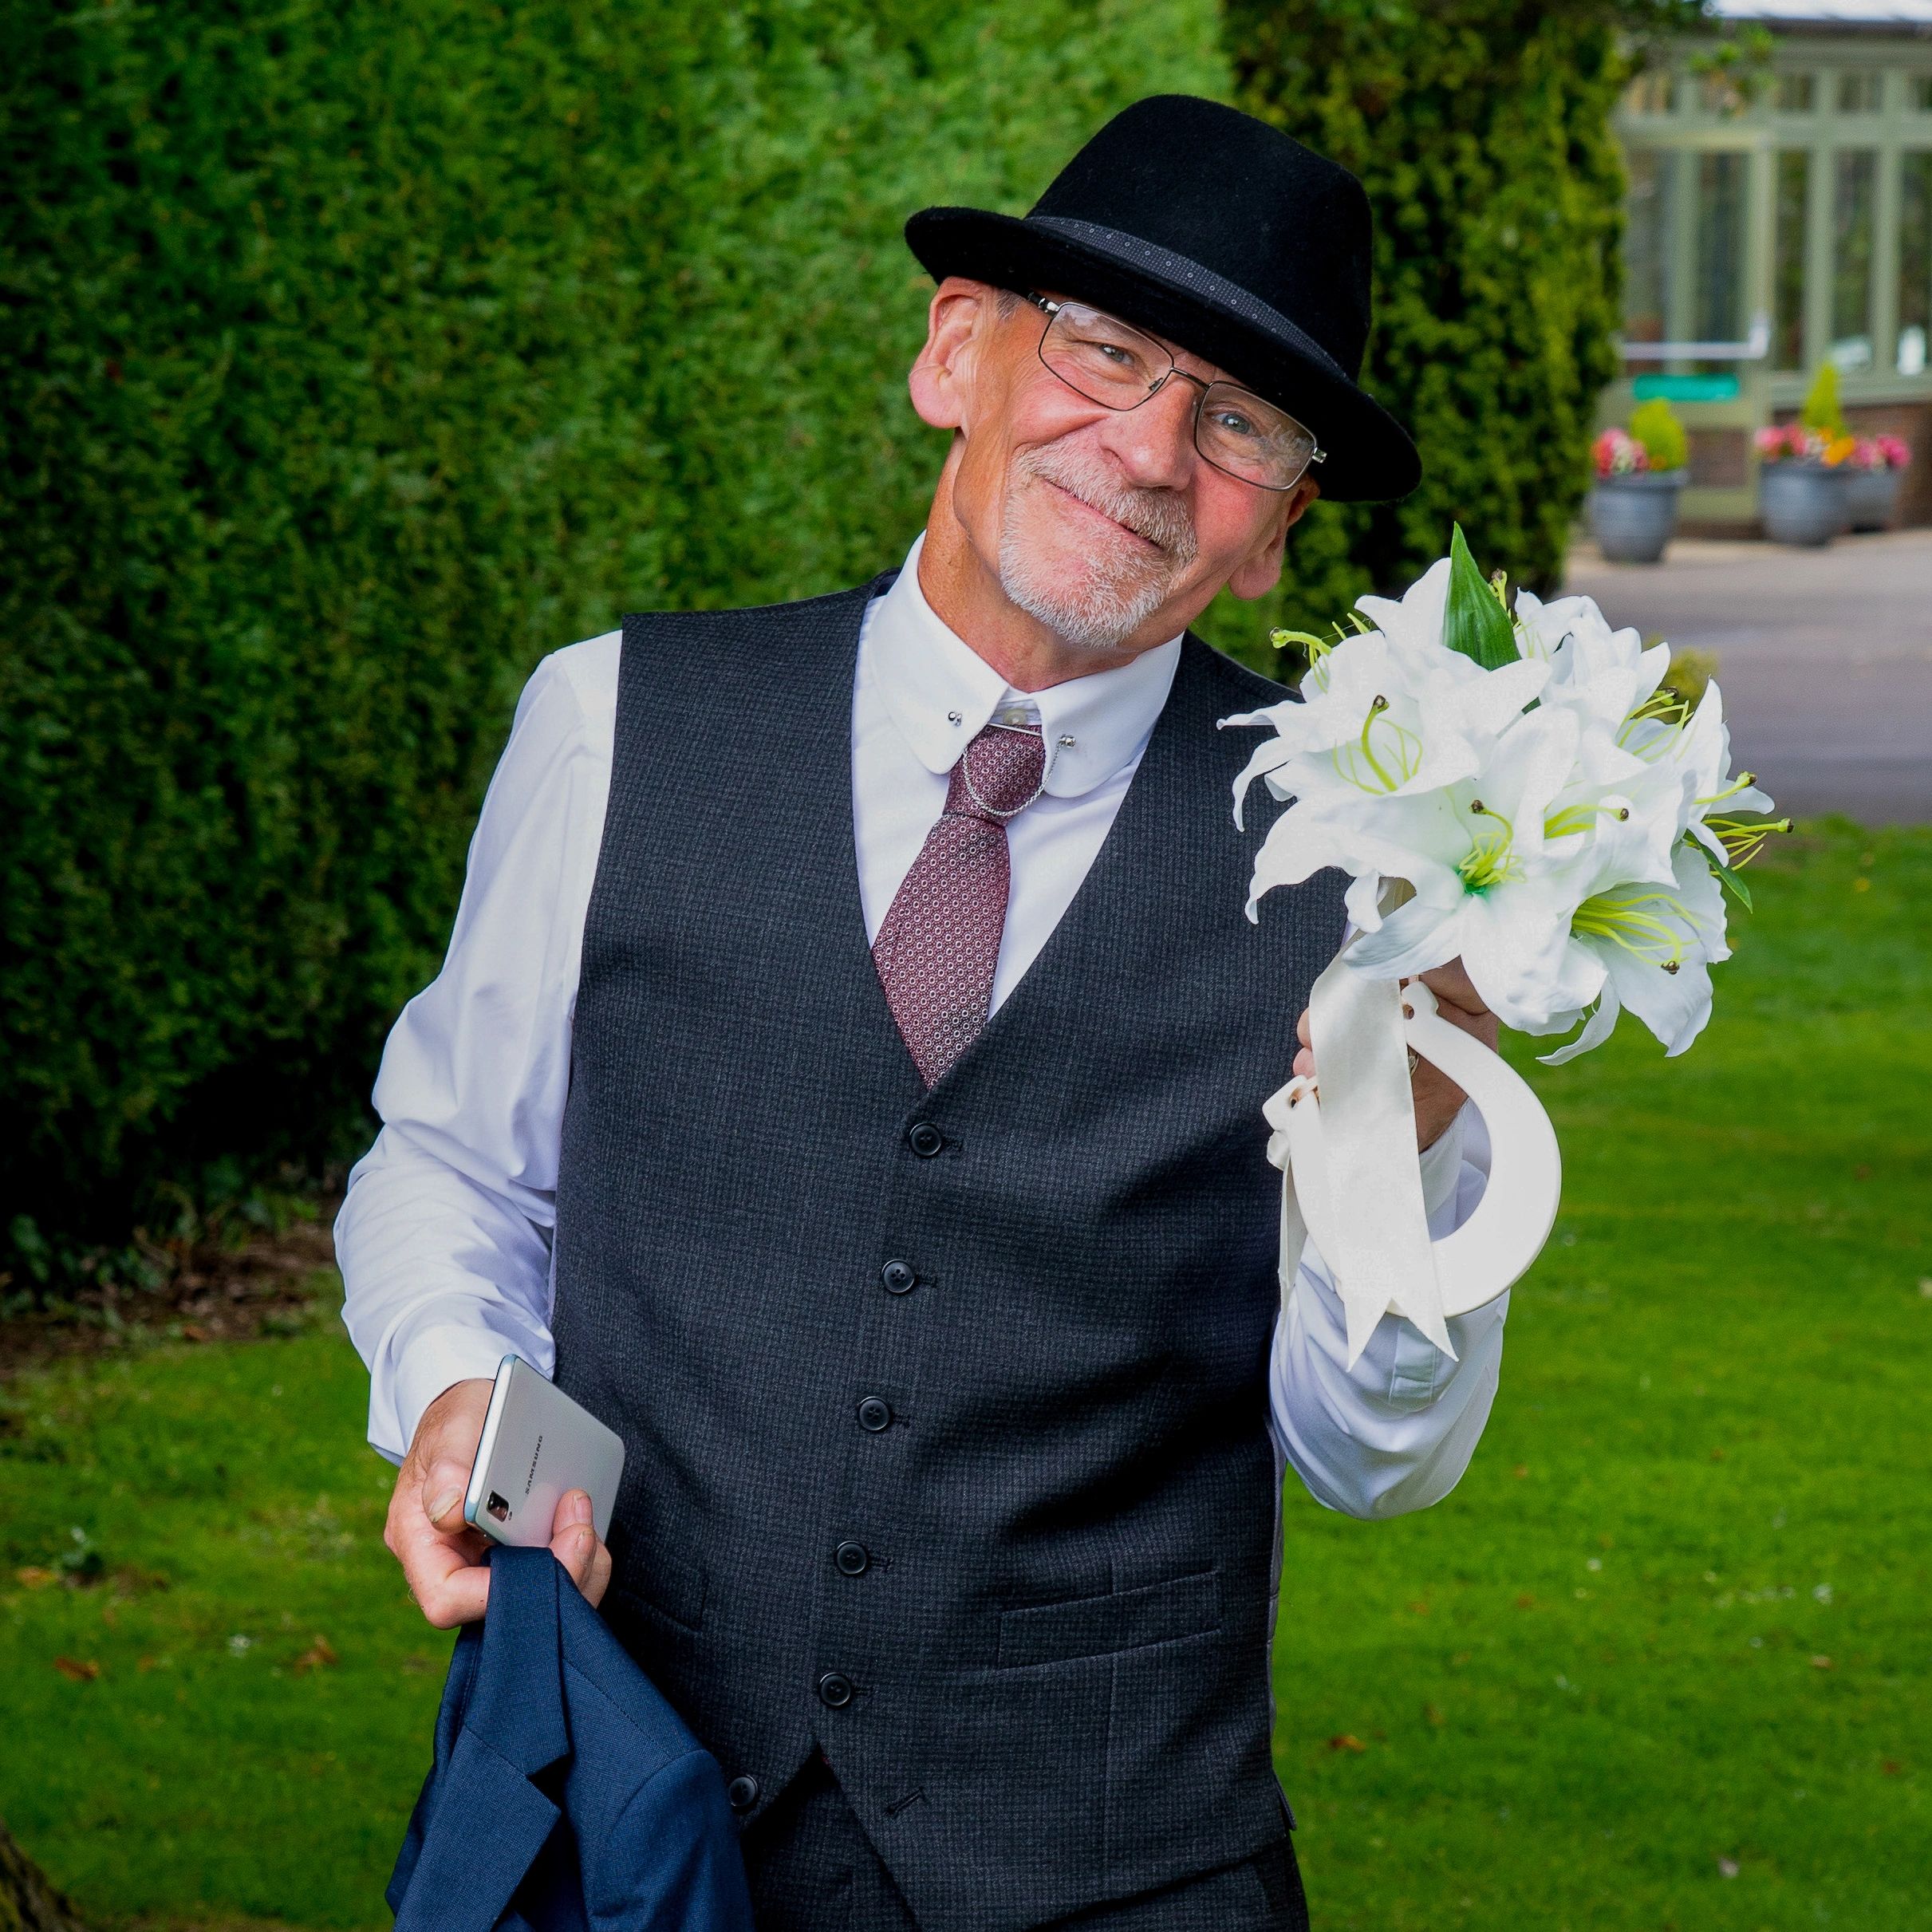 Wedding Wiltshire photography father of the bride holding bouquet of wedding flowers contemporary 